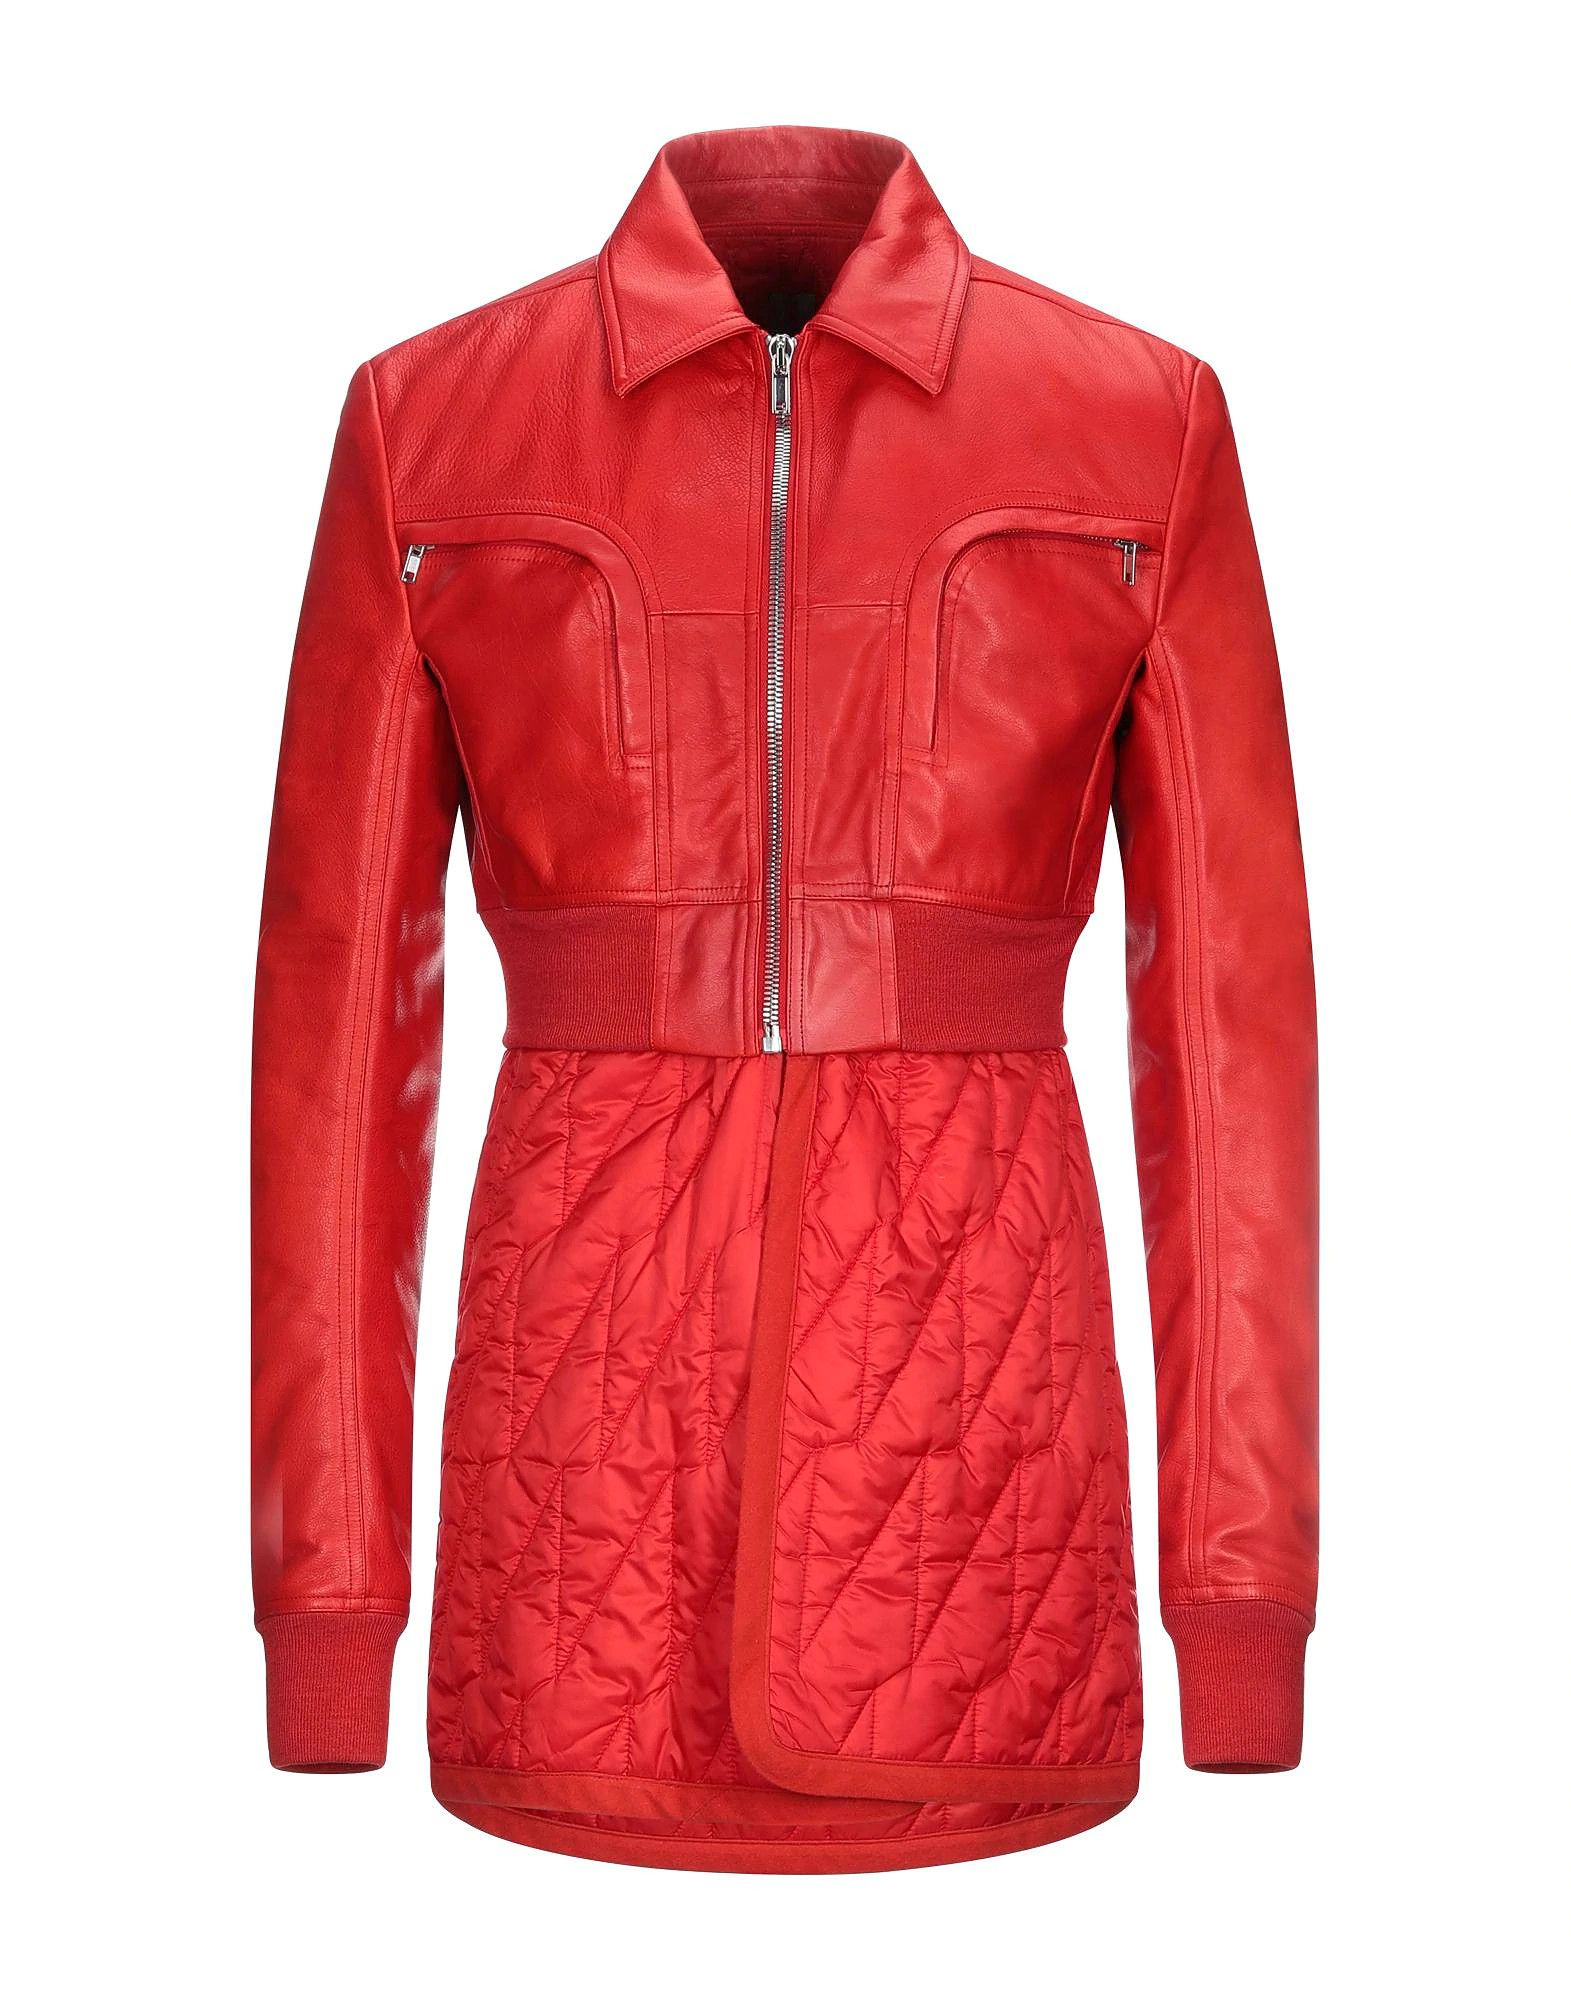 Rick Owens LAST DROP* Rick Owens FW19 Larry Red Leather Cropped Jacket Size US M / EU 48-50 / 2 - 1 Preview